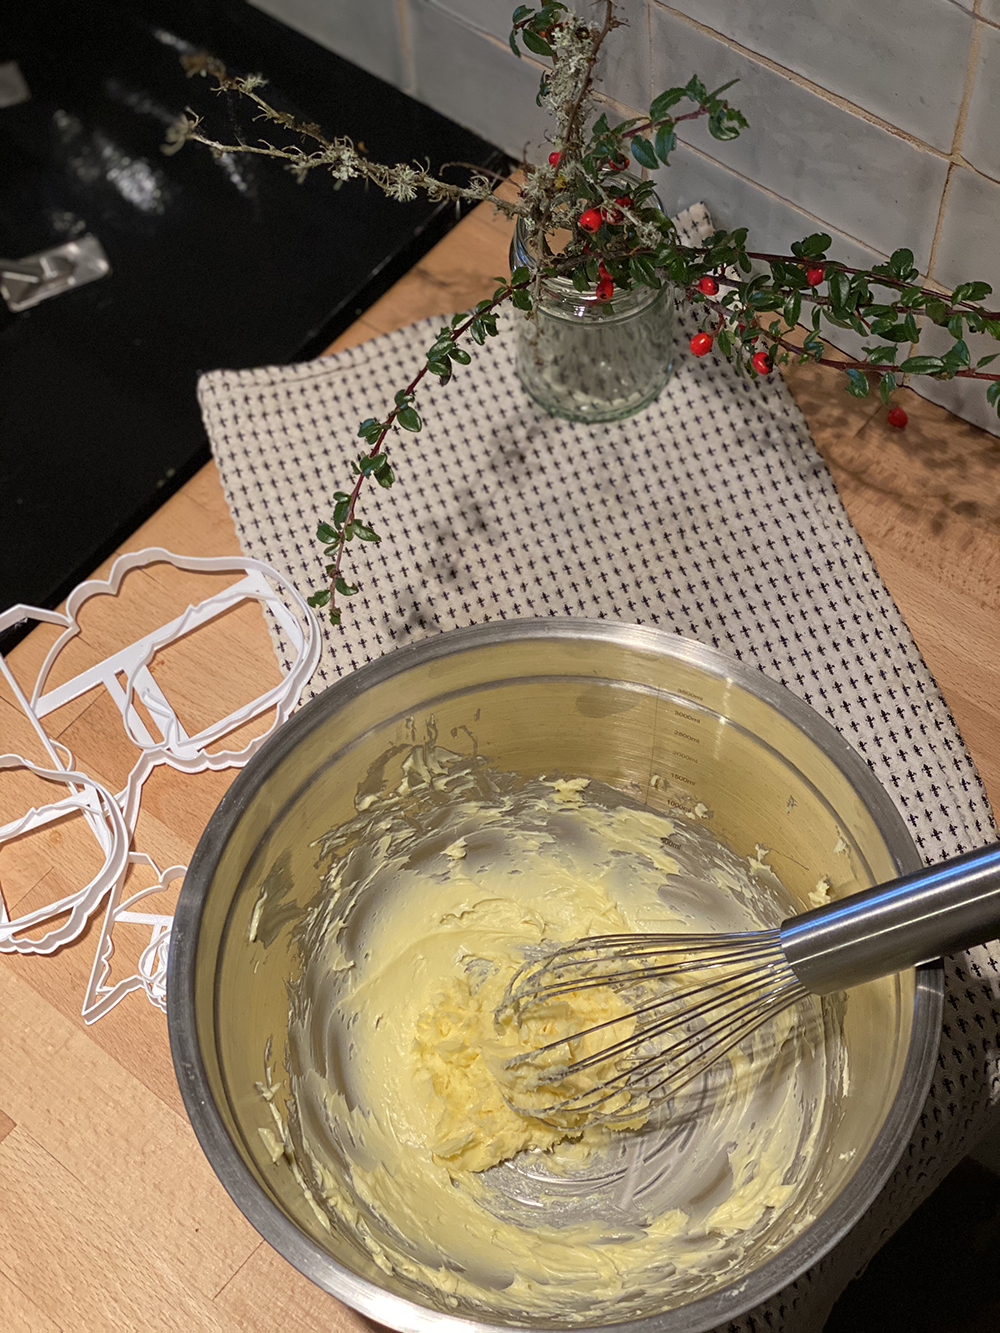 Butter is whisked in a metallic mixing bowl.